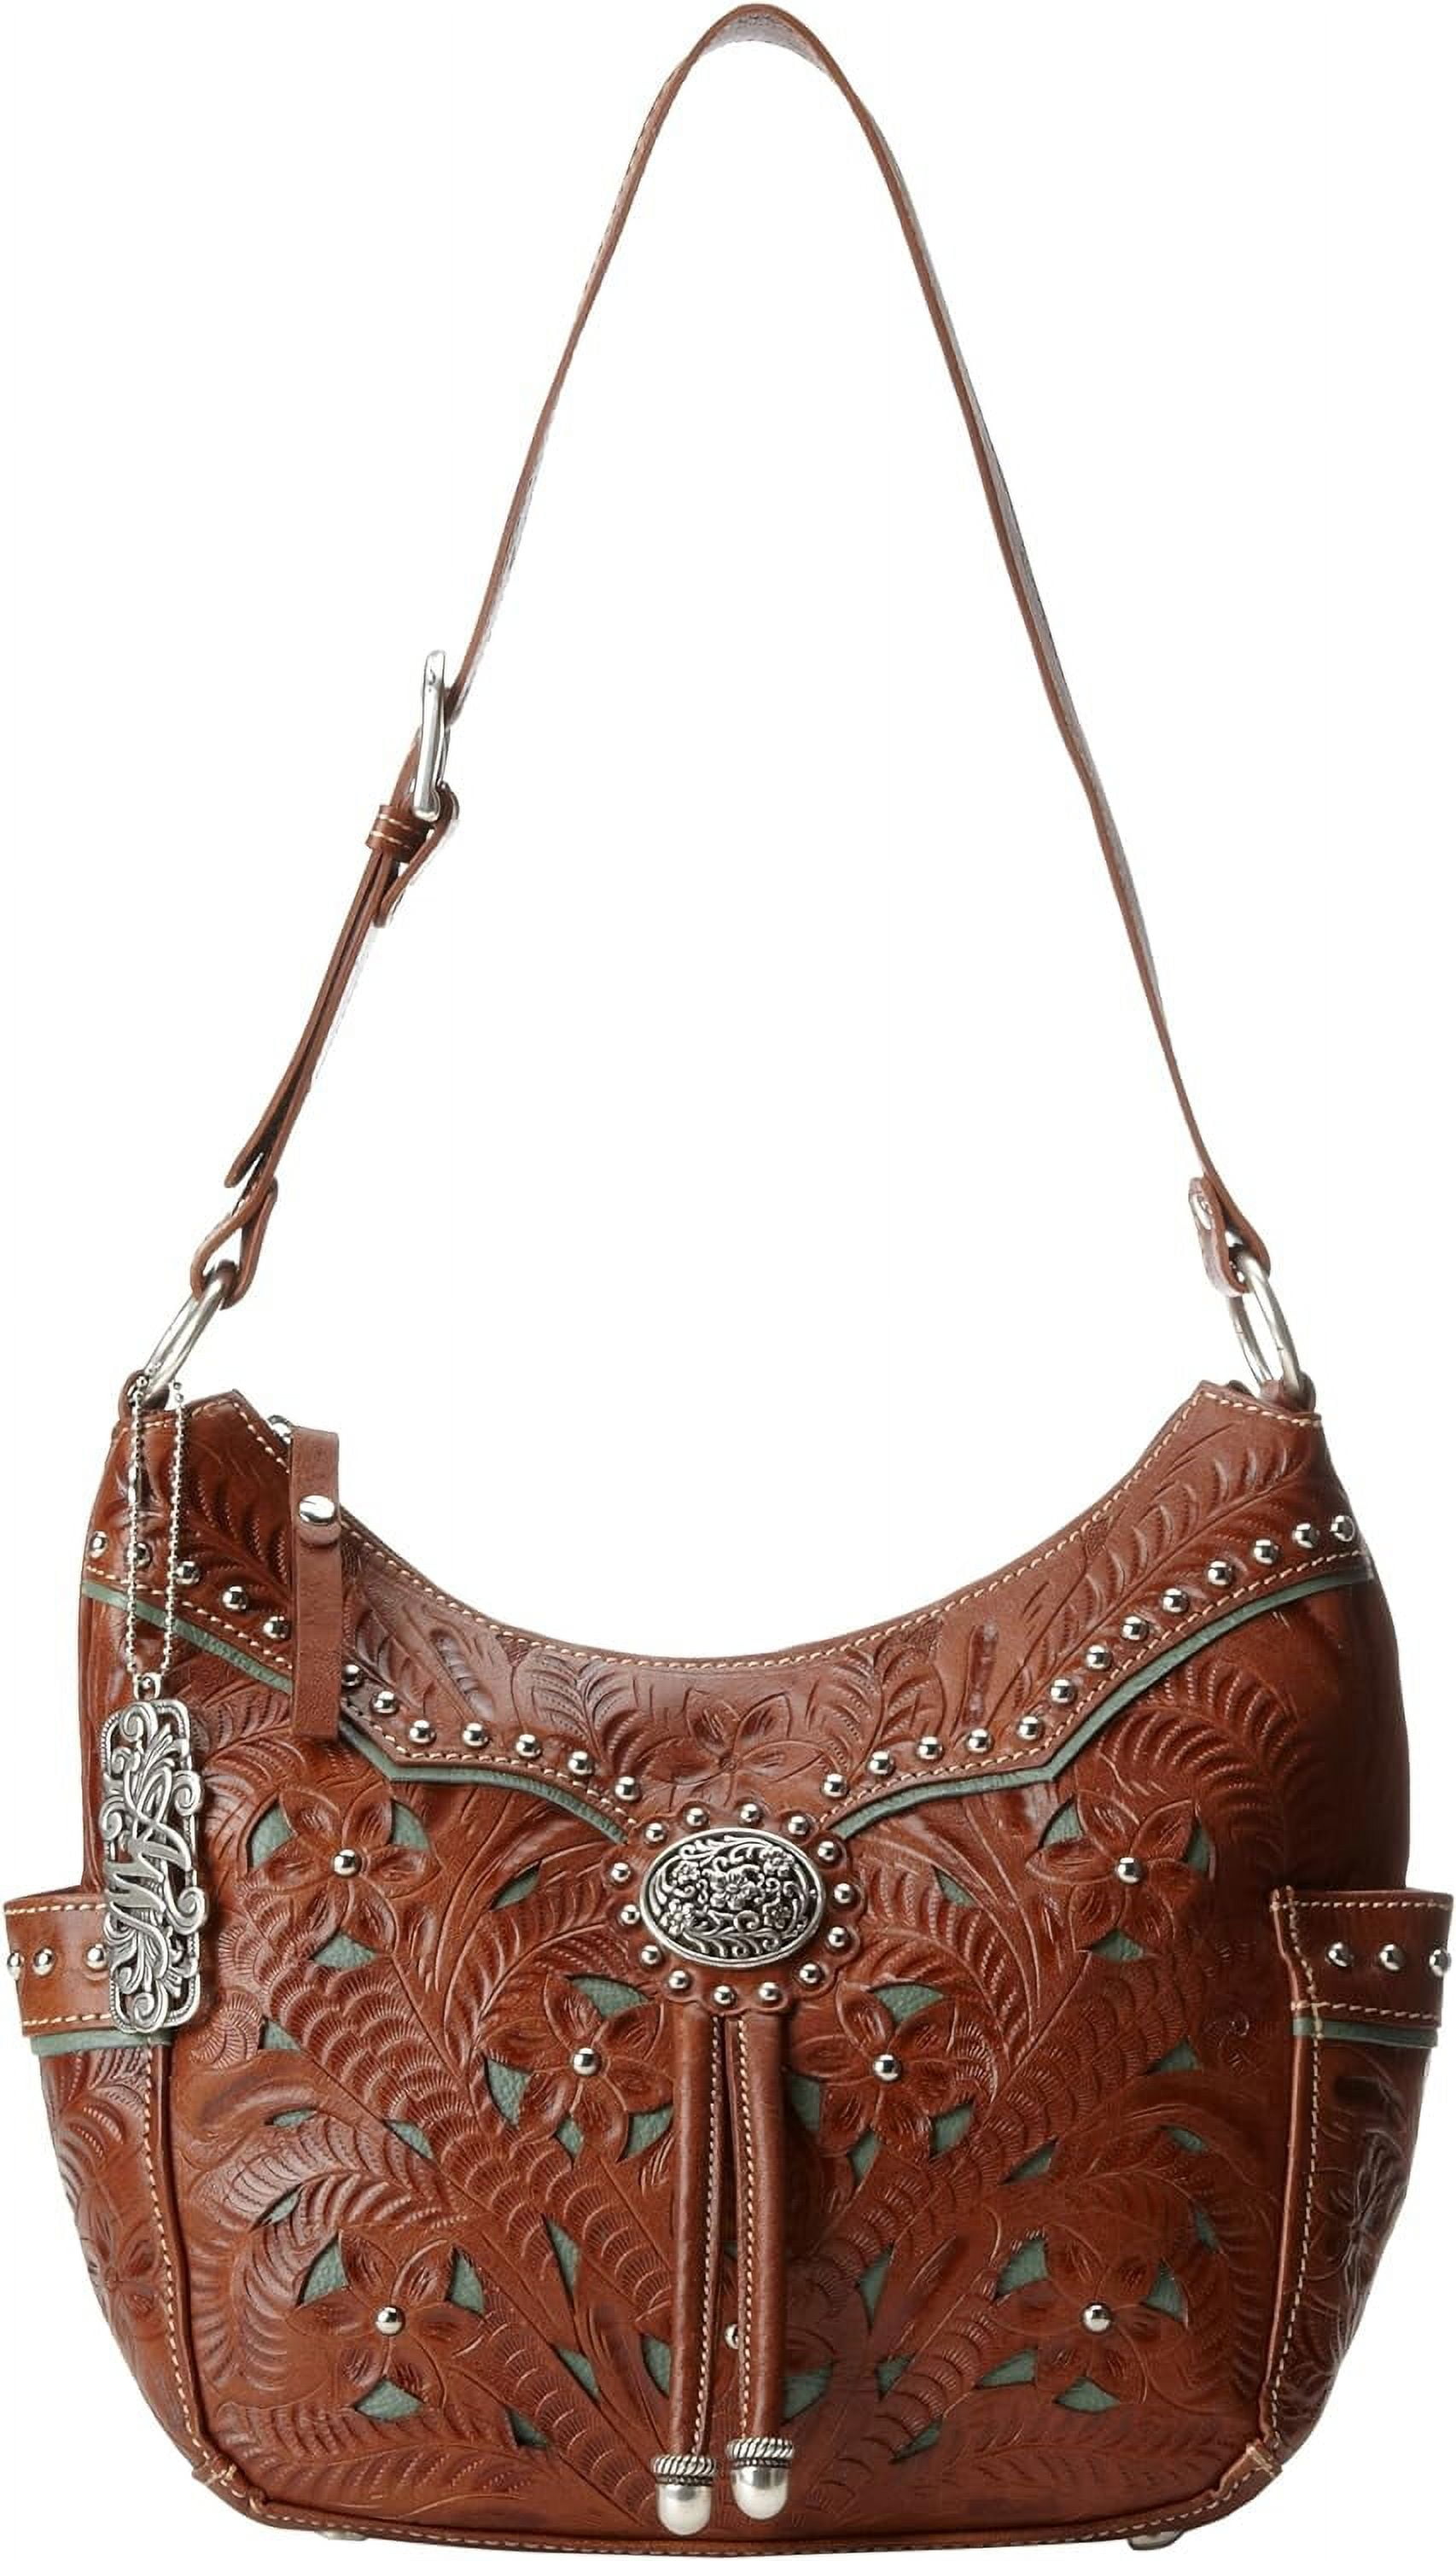 American West LCBT620 Lady Lace Zip Top Everyday Hobo with 2 Side Pockets 44 Antique Brown Turquoise 2ea76512 cc7e 4a87 9100 c7fa4bf322cb.68bff3919880a23d506de41c20e002e4